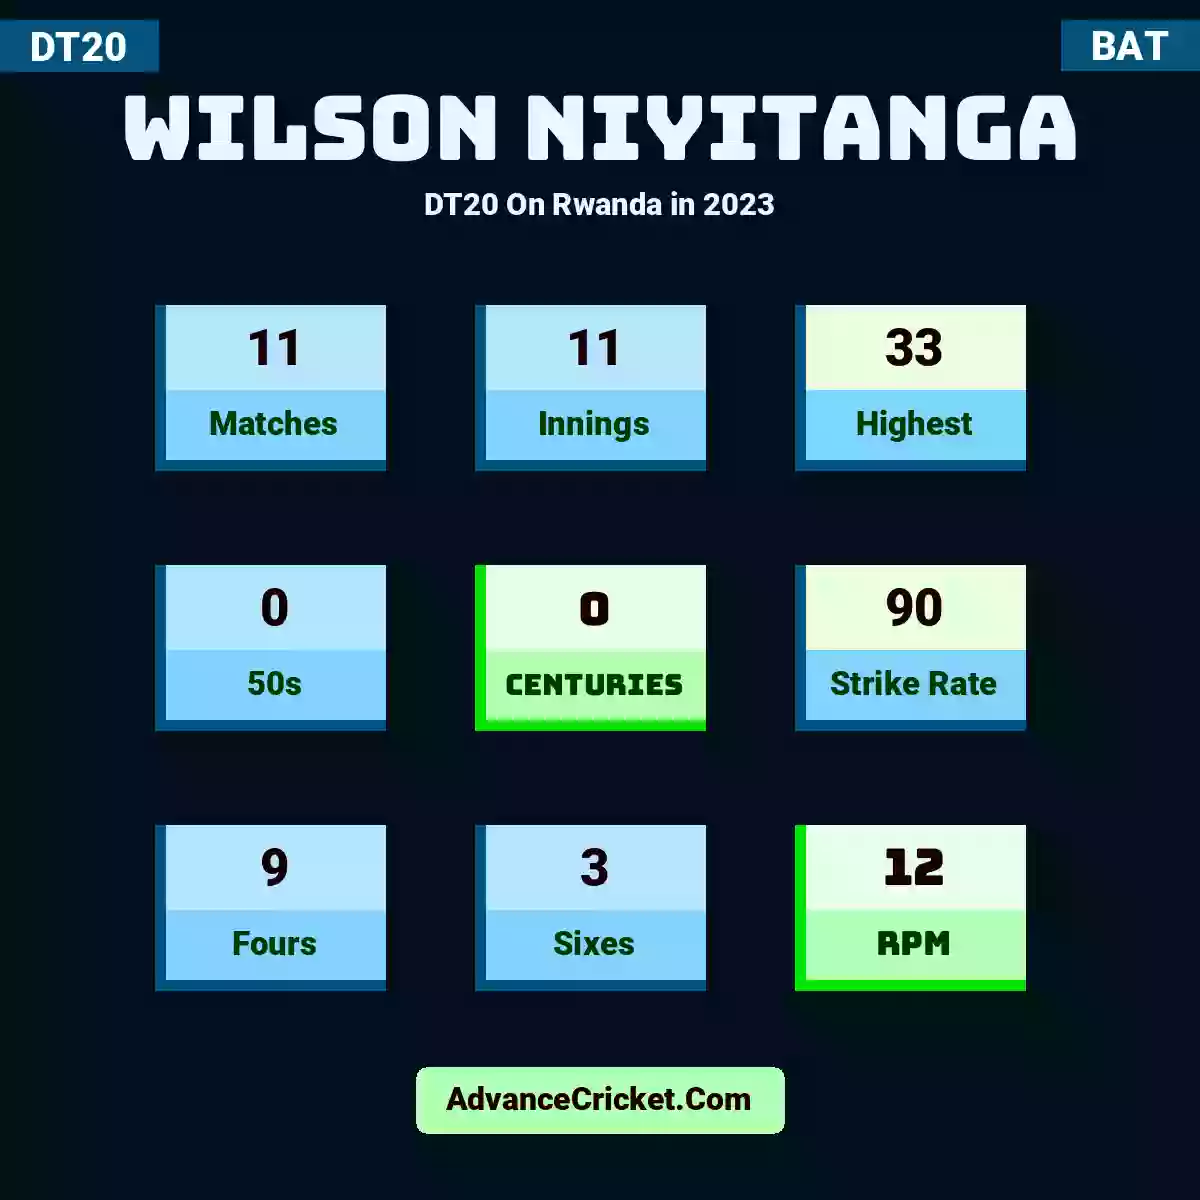 Wilson Niyitanga DT20  On Rwanda in 2023, Wilson Niyitanga played 11 matches, scored 33 runs as highest, 0 half-centuries, and 0 centuries, with a strike rate of 90. W.Niyitanga hit 9 fours and 3 sixes, with an RPM of 12.